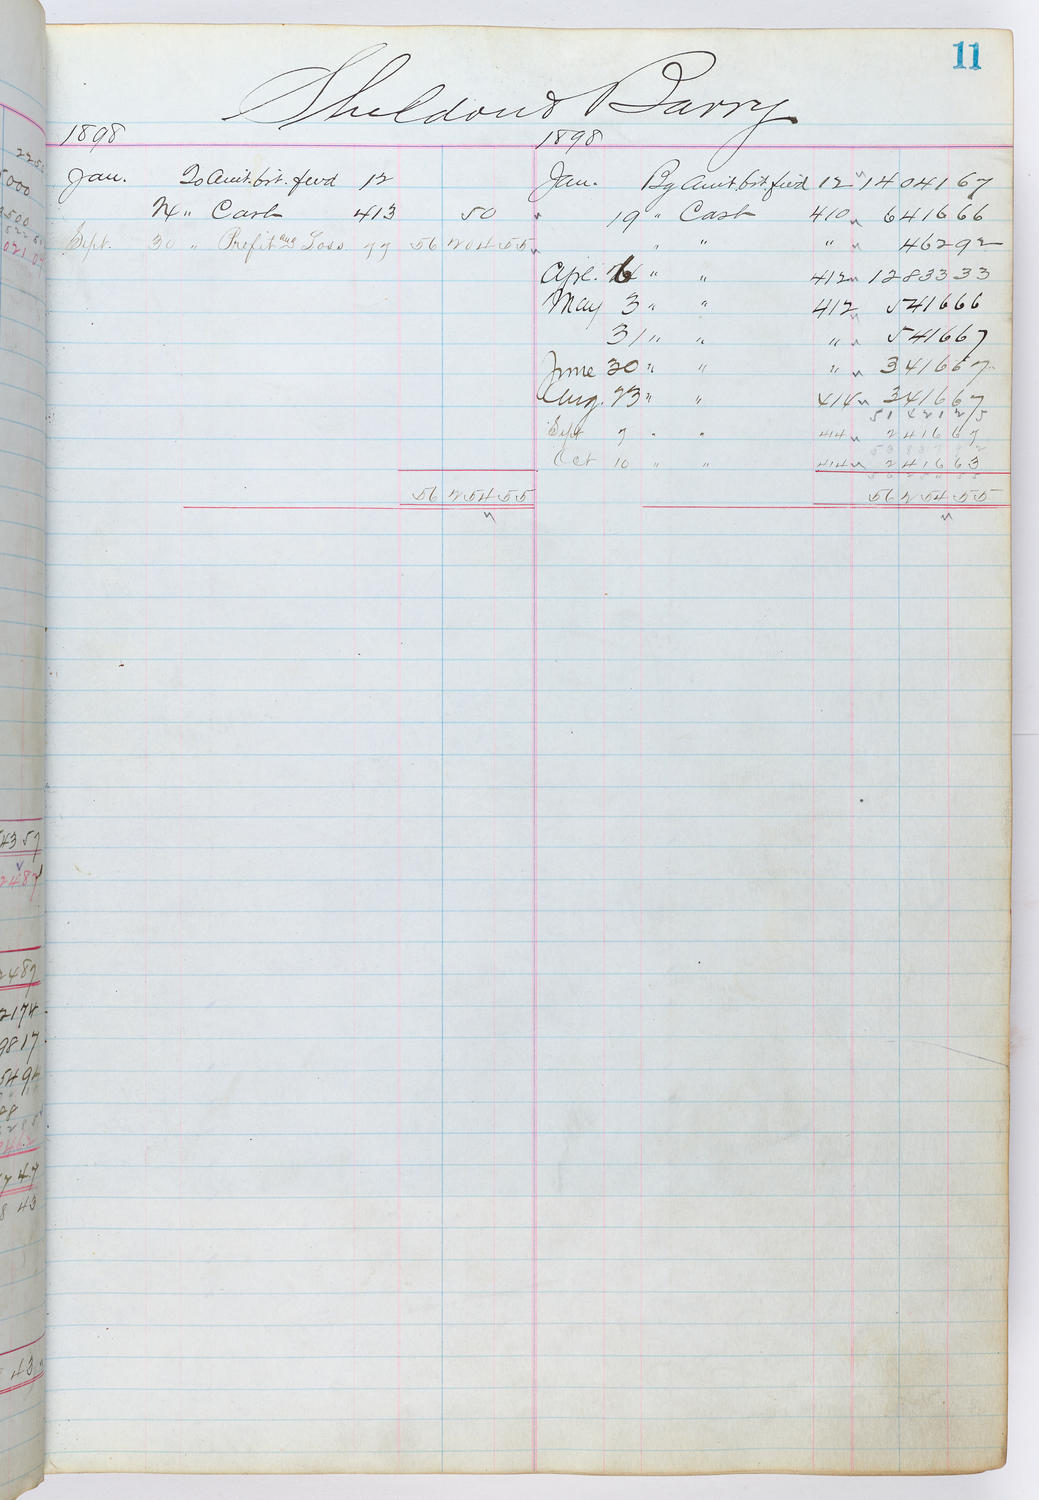 Music Hall Accounting Ledger, volume 1, page 11